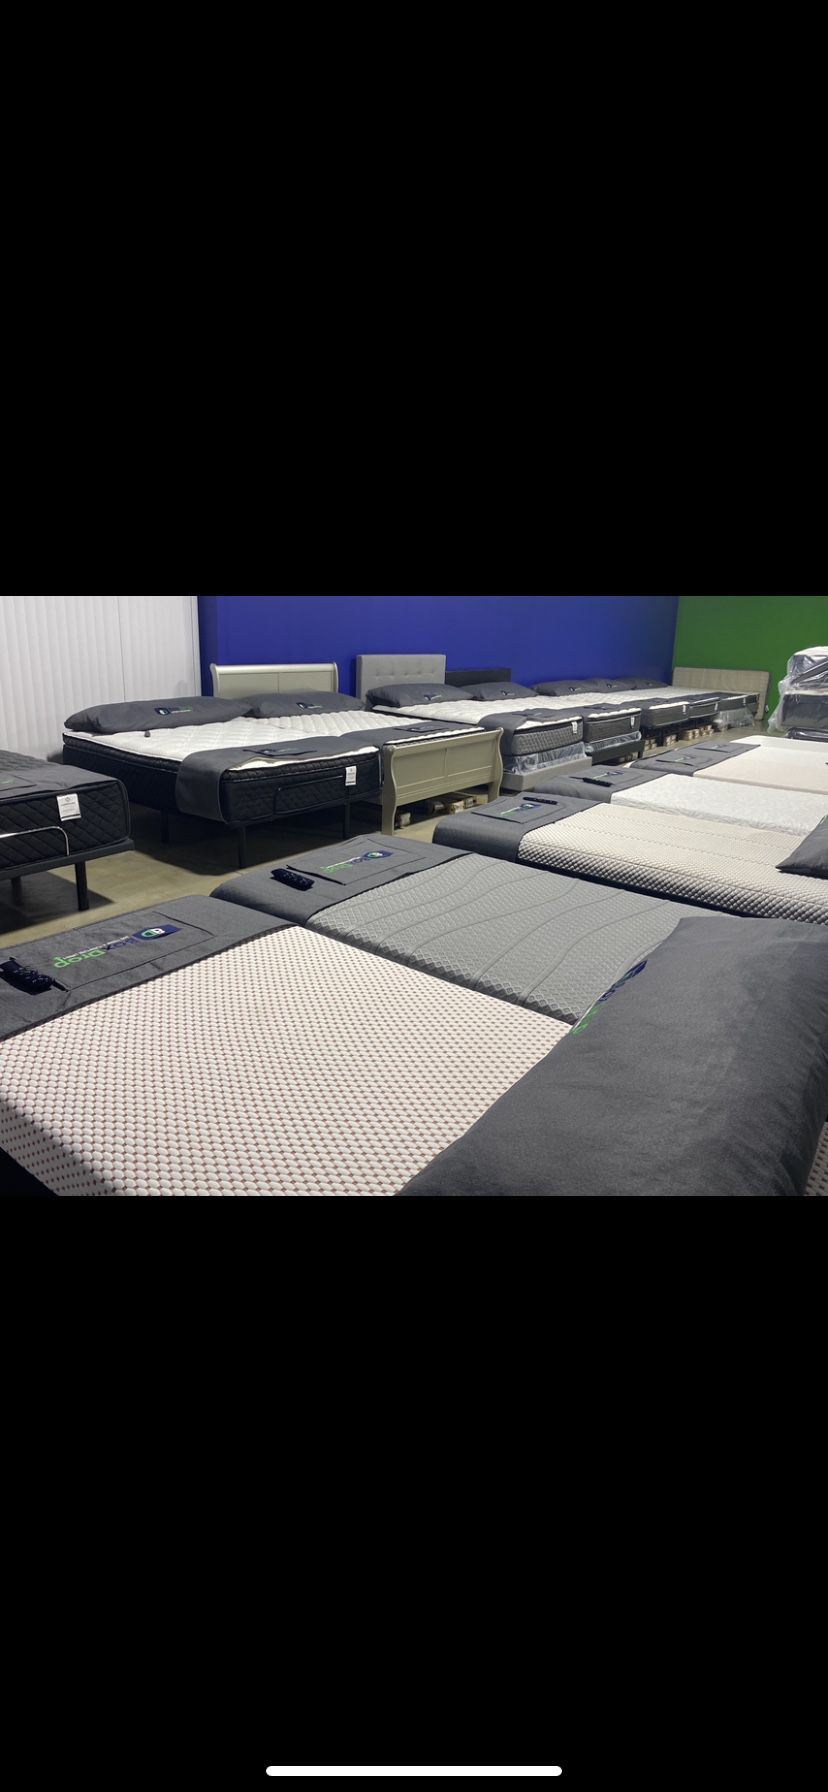 Limited Mattress Inventory Remaining!!